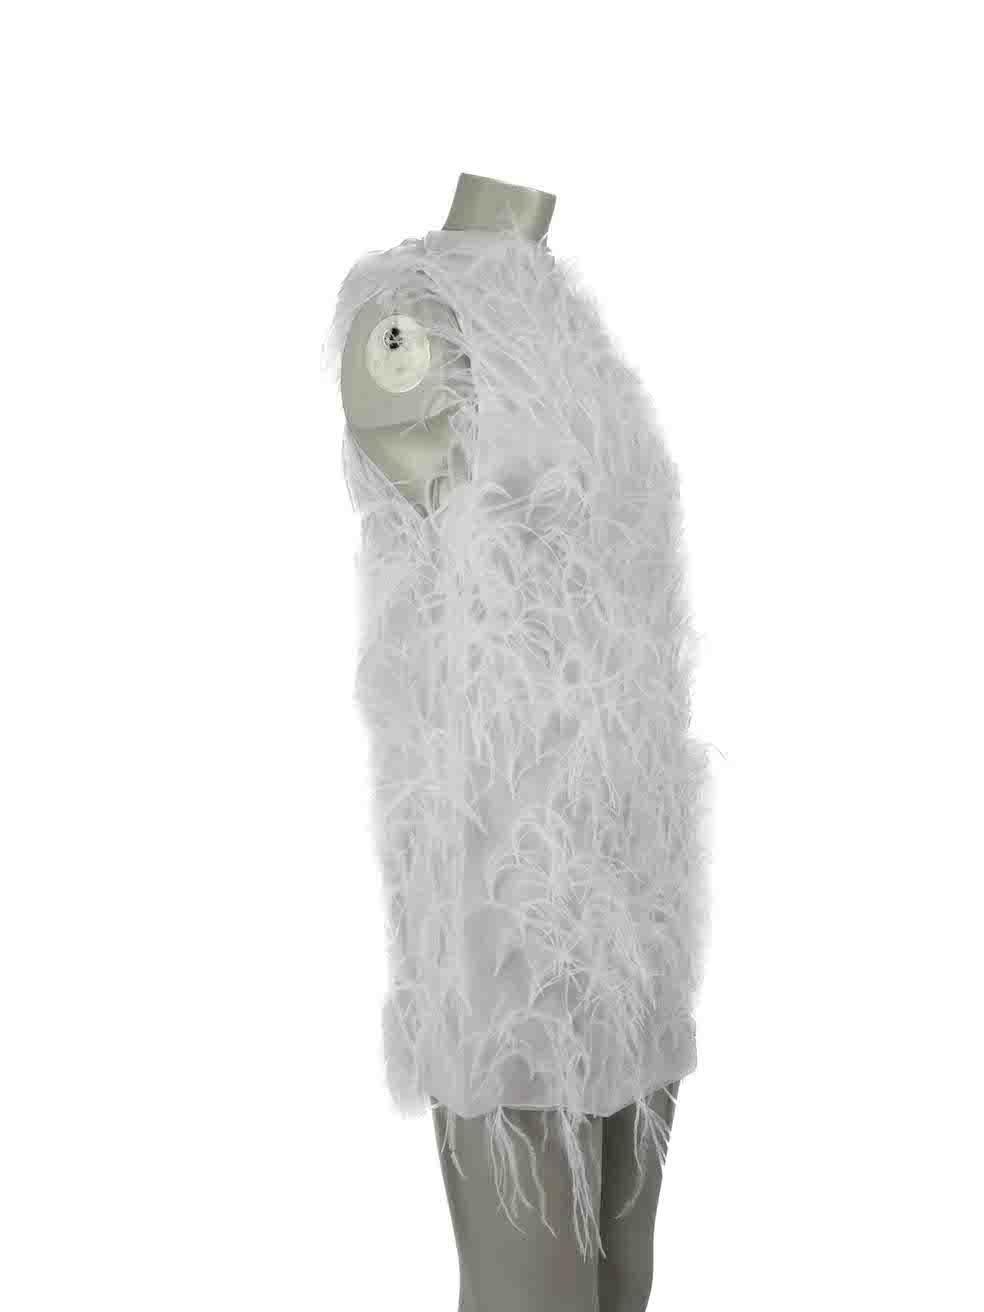 CONDITION is Never worn, with tags. No visible wear to dress is evident on this new Ralph & Russo designer resale item.
  
Details
White
Silk
Dress
Feather detail
Mini
Halterneck
Sleeveless
Back neck tie fastening

Made in UK
  
Composition
Main: